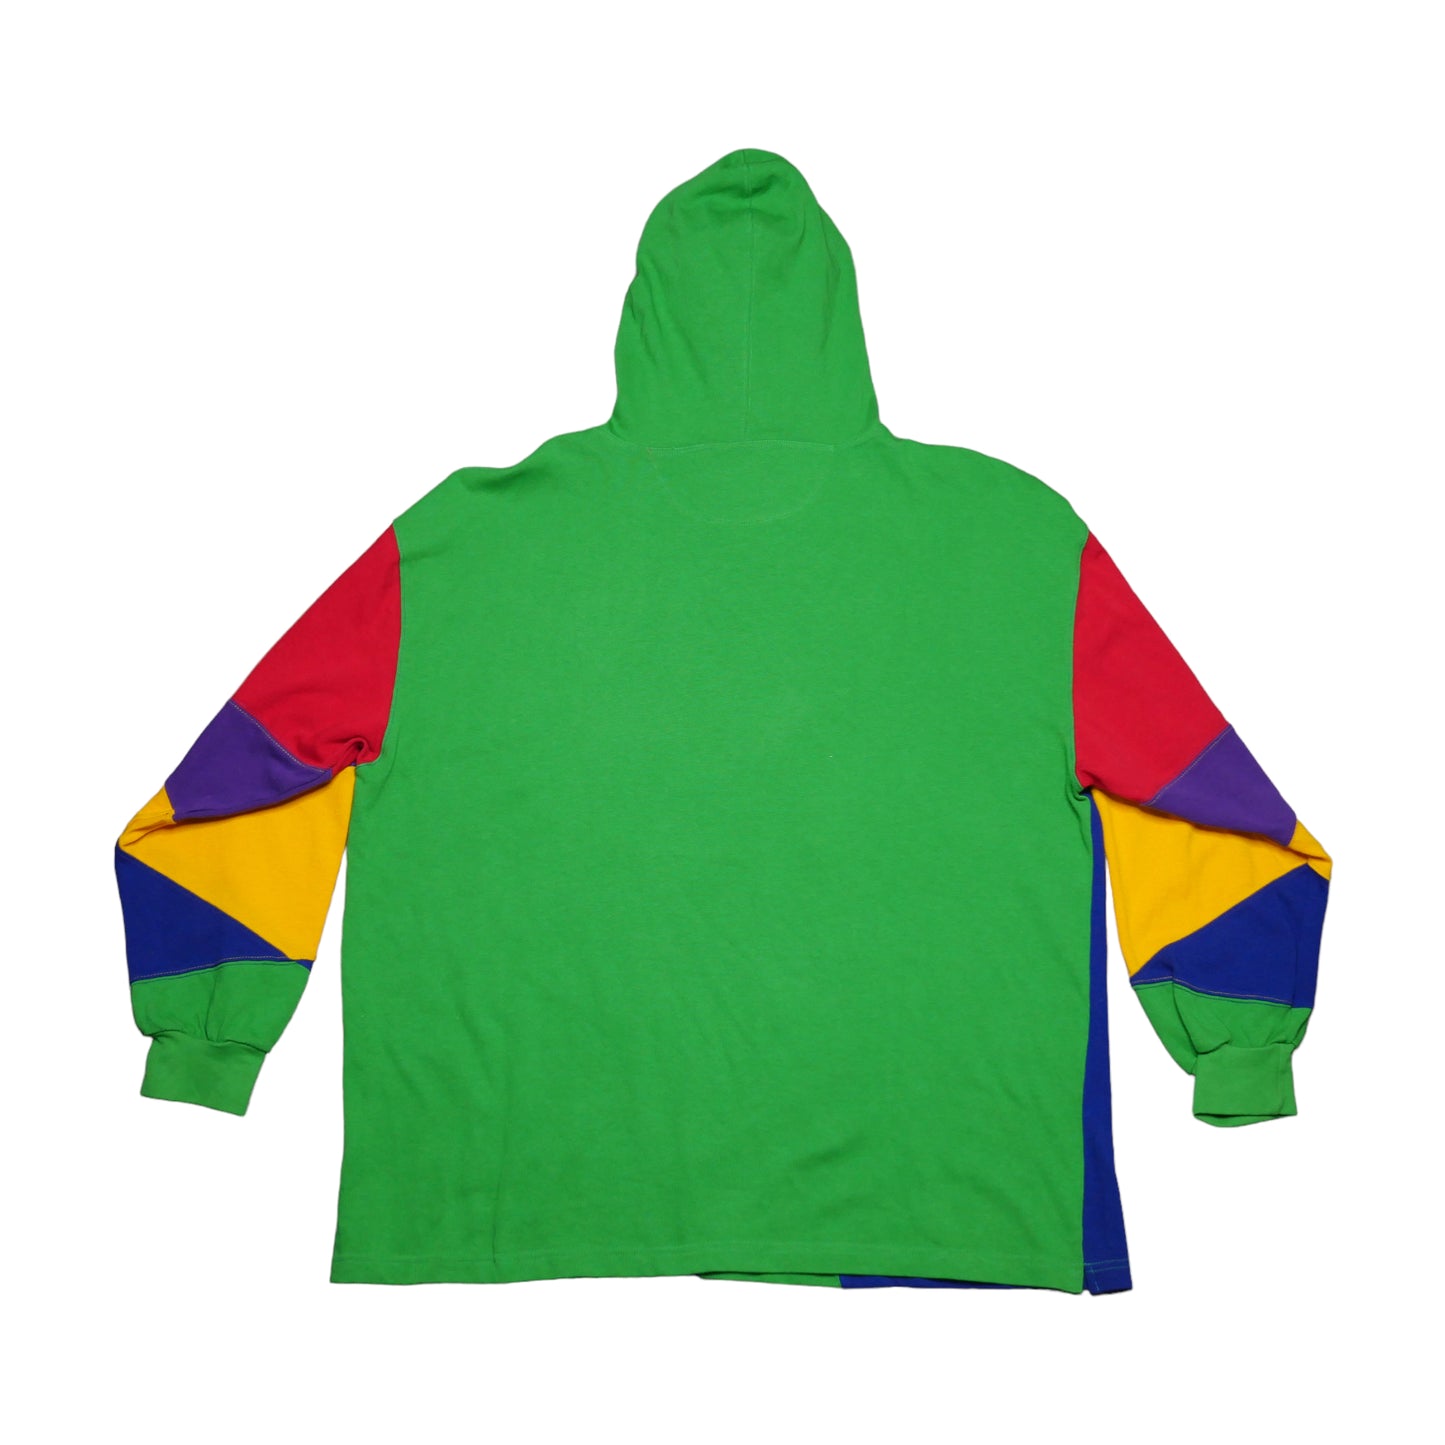 In the Paint Notre Dame Hooded Longsleeve - XL